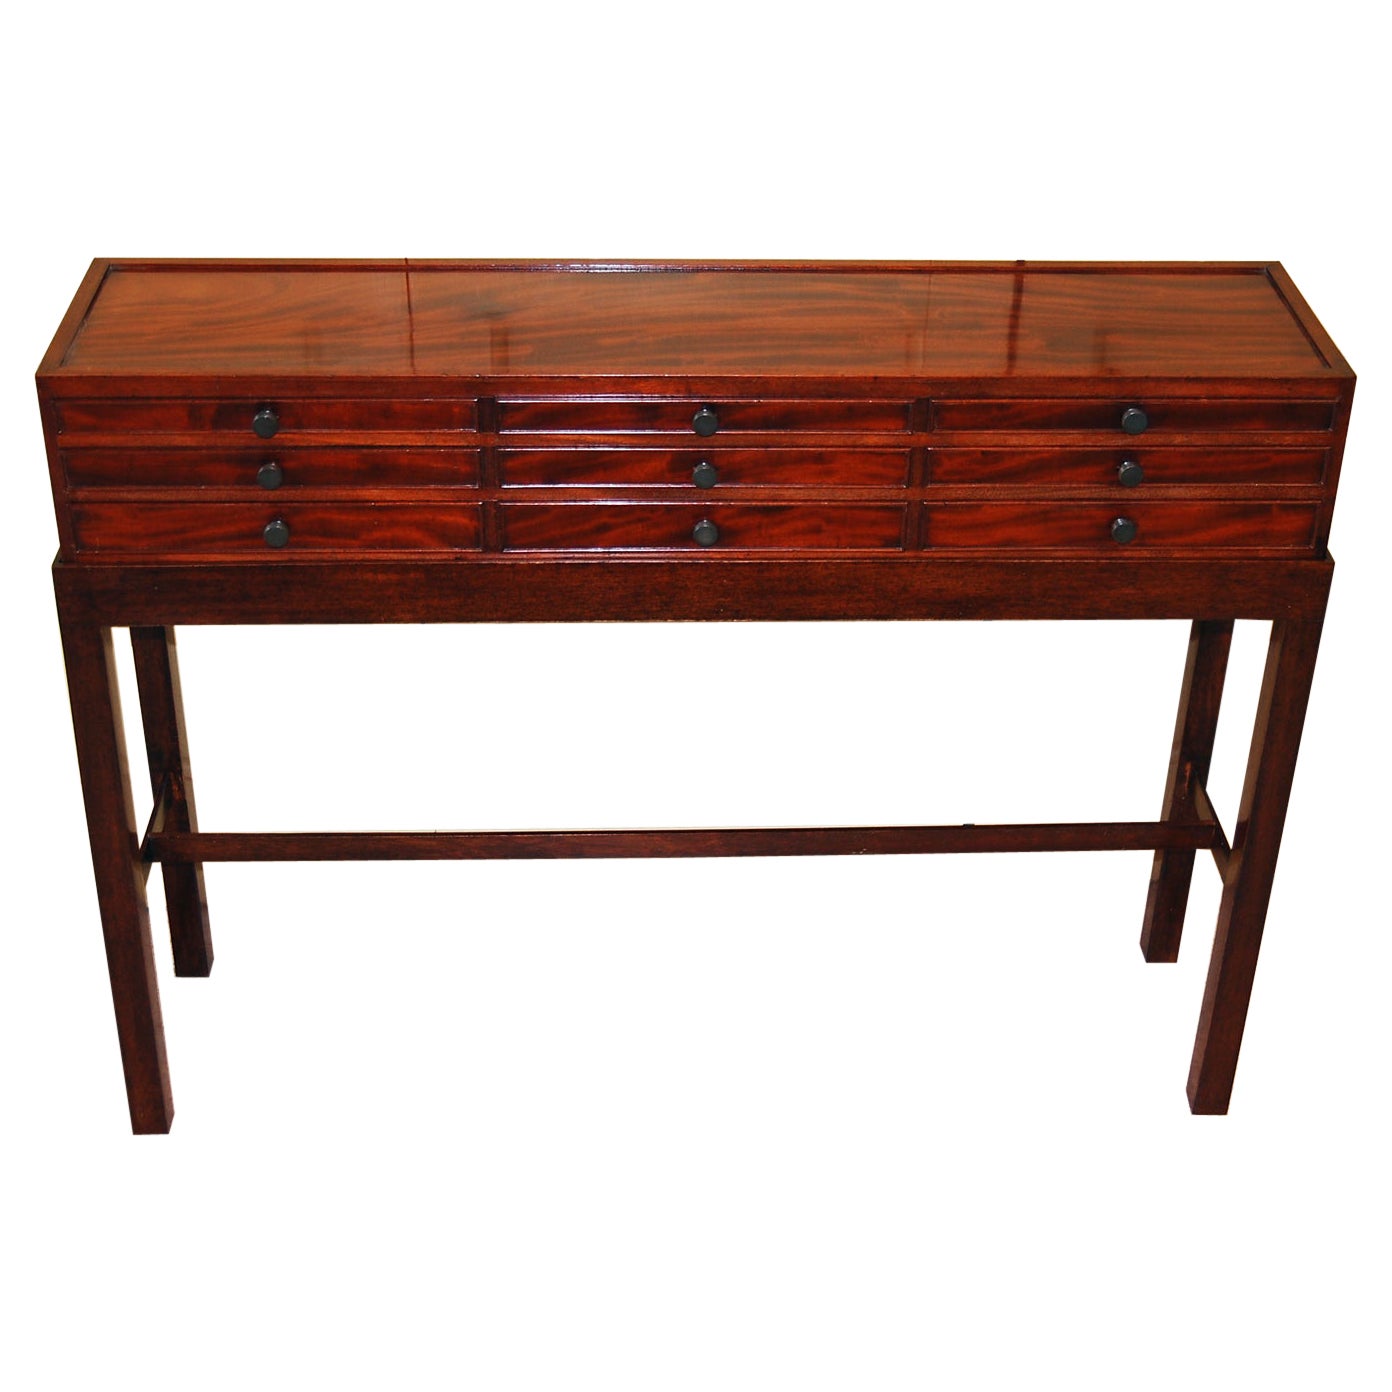 English Regency Mahogany Collectors Drawers now on Custom Built Mahogany Stand For Sale